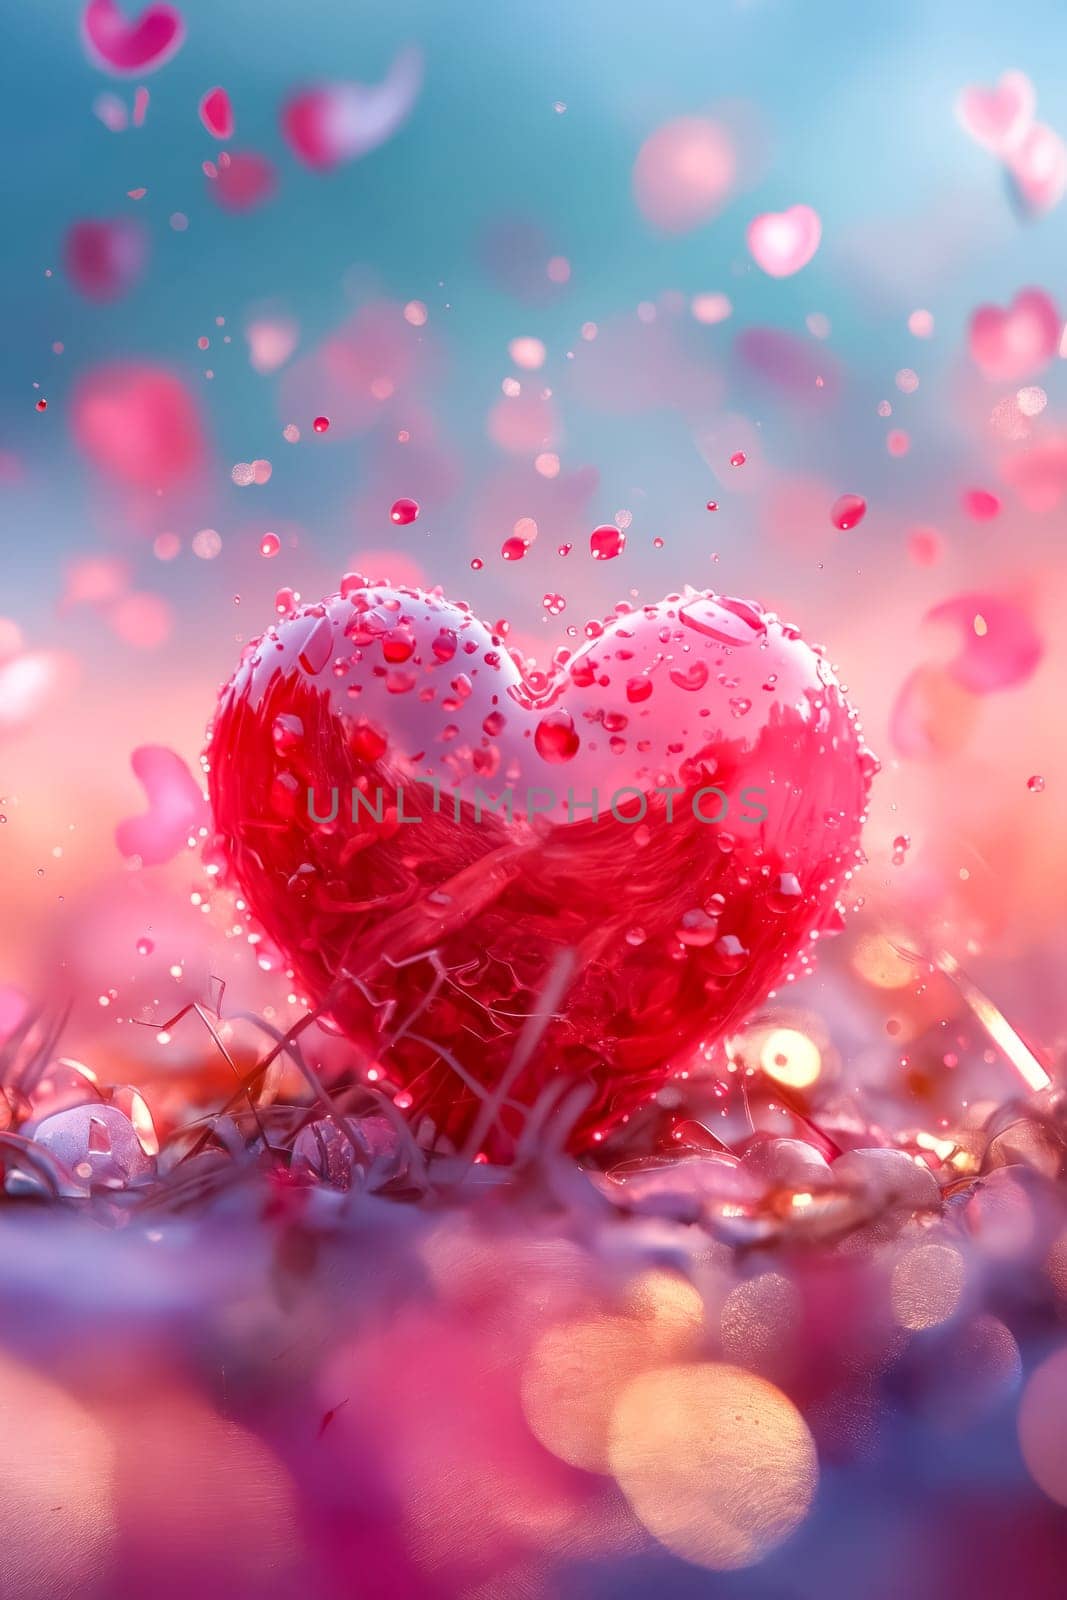 A heart is surrounded by pink flowers and is partially covered in water. The image has a romantic and dreamy feel to it. Generative AI